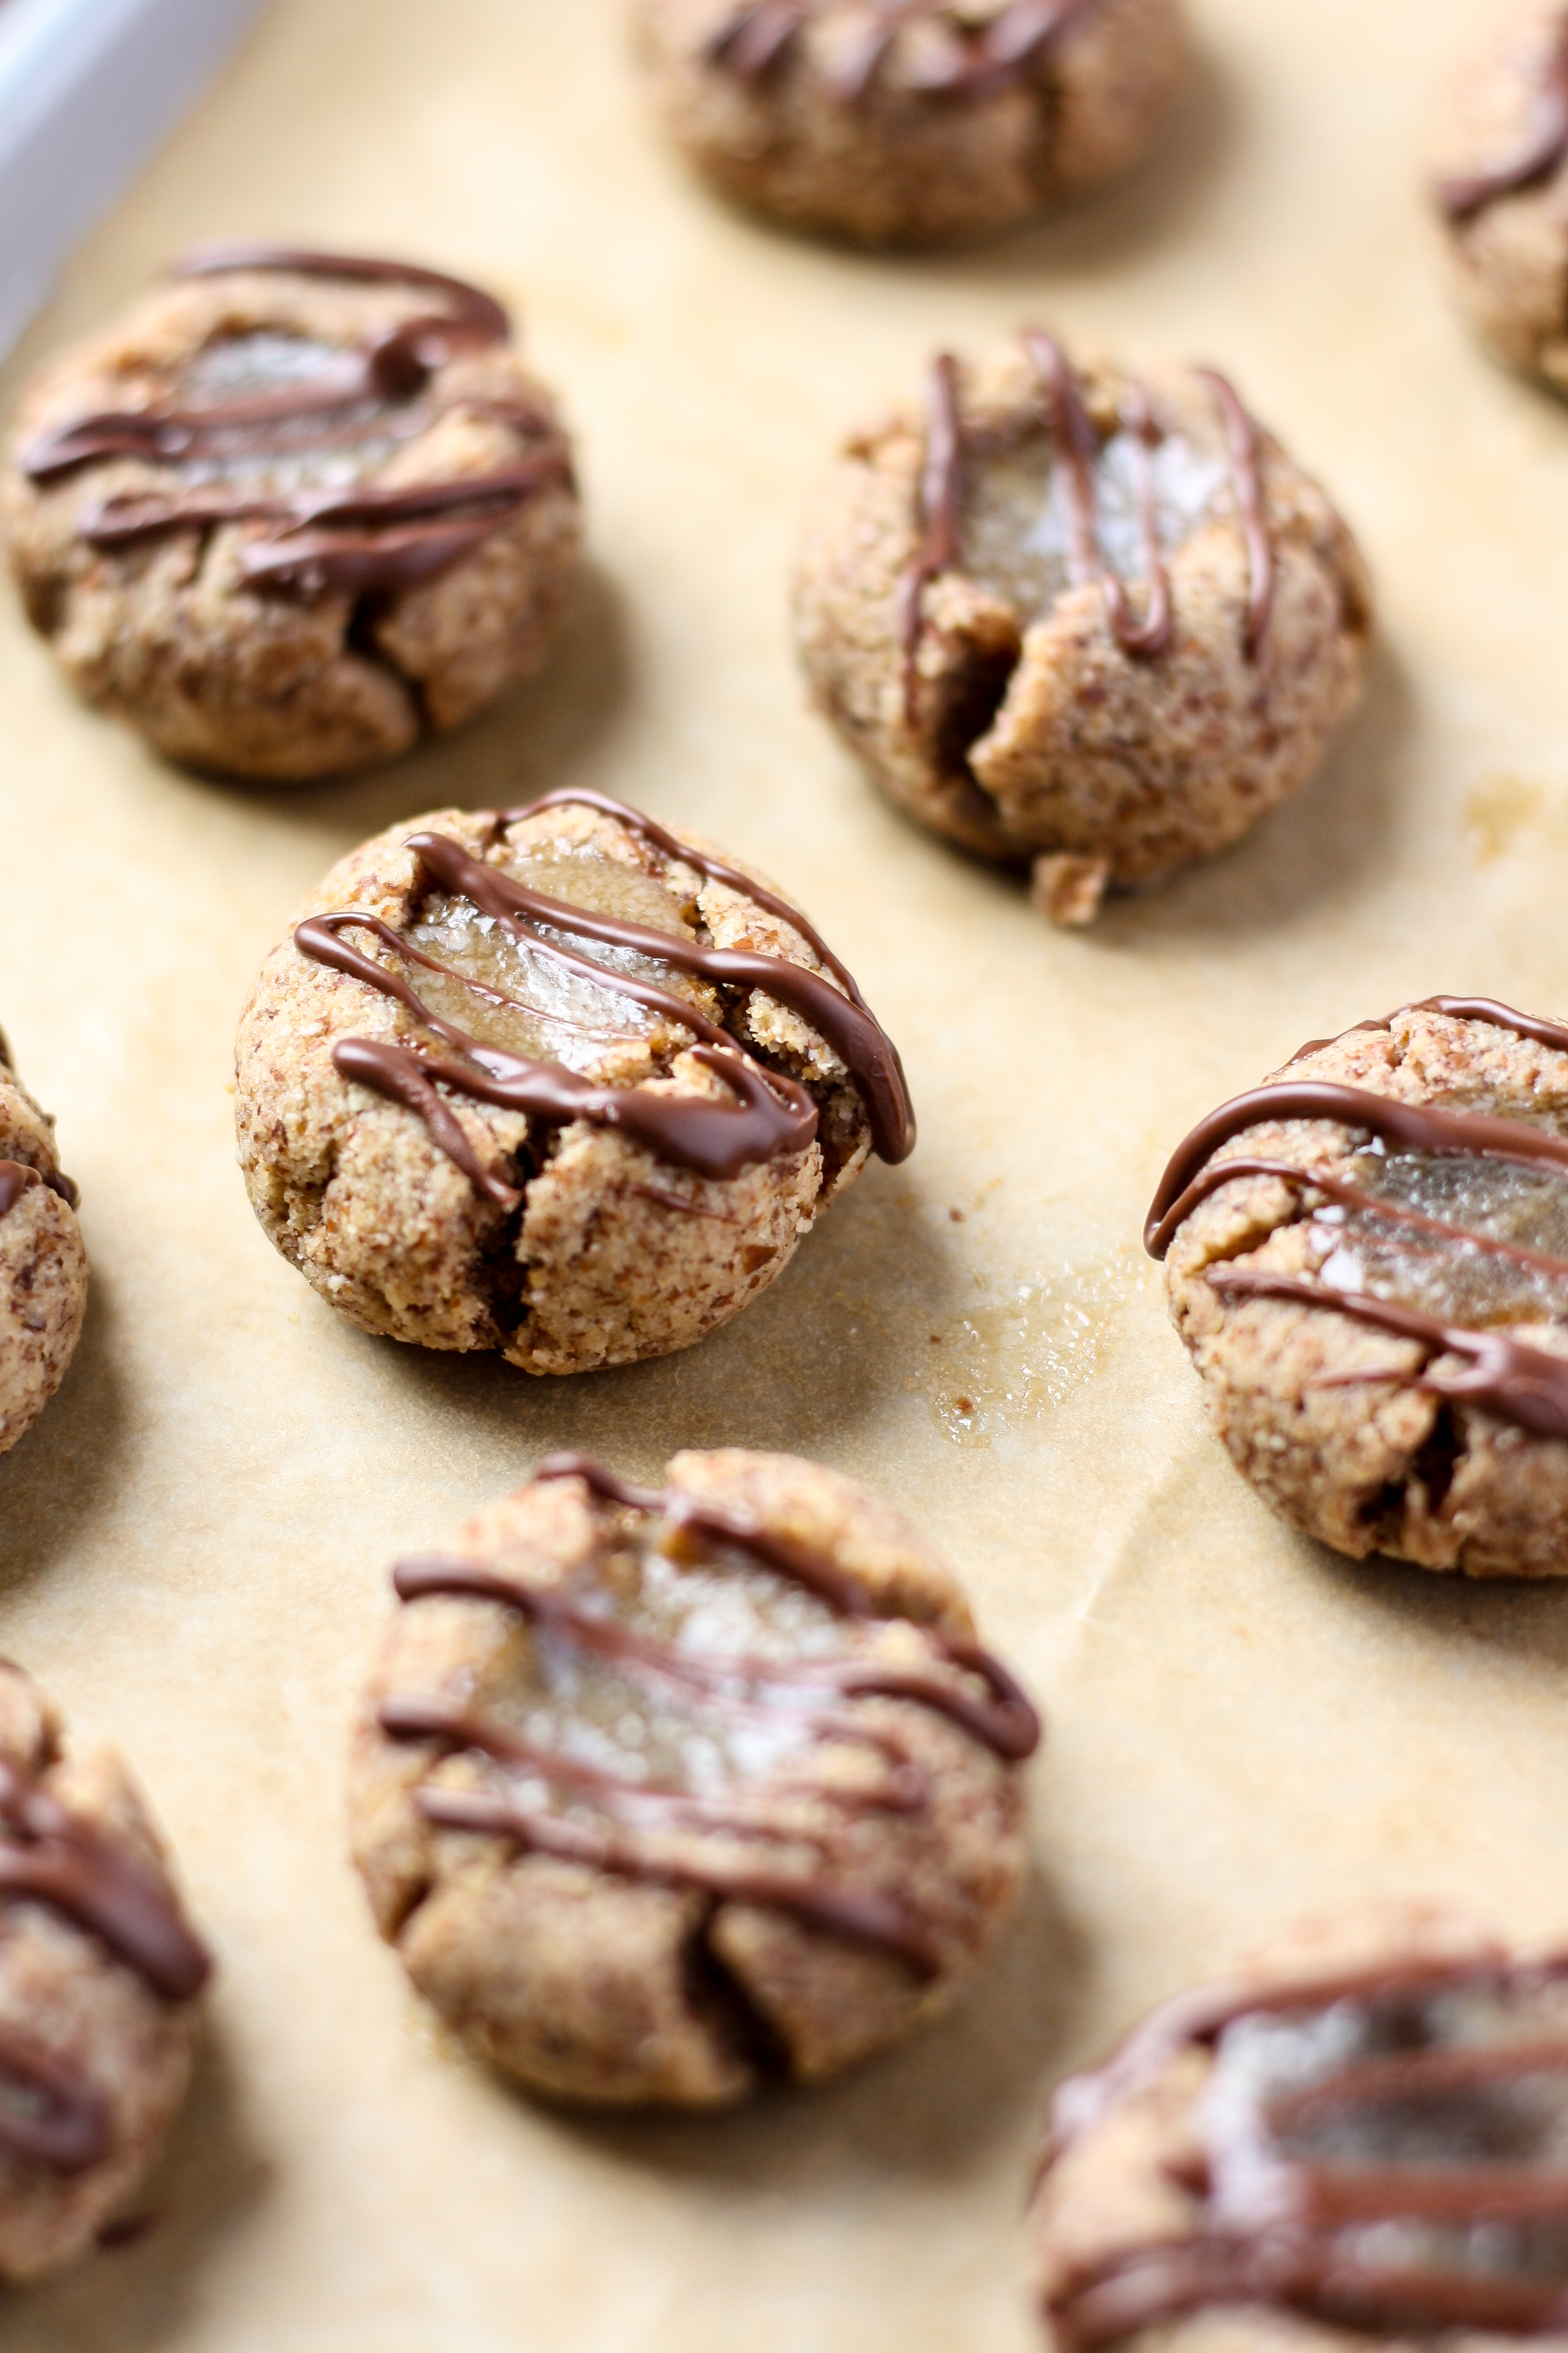 Cute, bite-sized, grain-free thumbprints with salted caramel centers and chocolate drizzle, these cookies are the perfect treat for your paleo peeps.